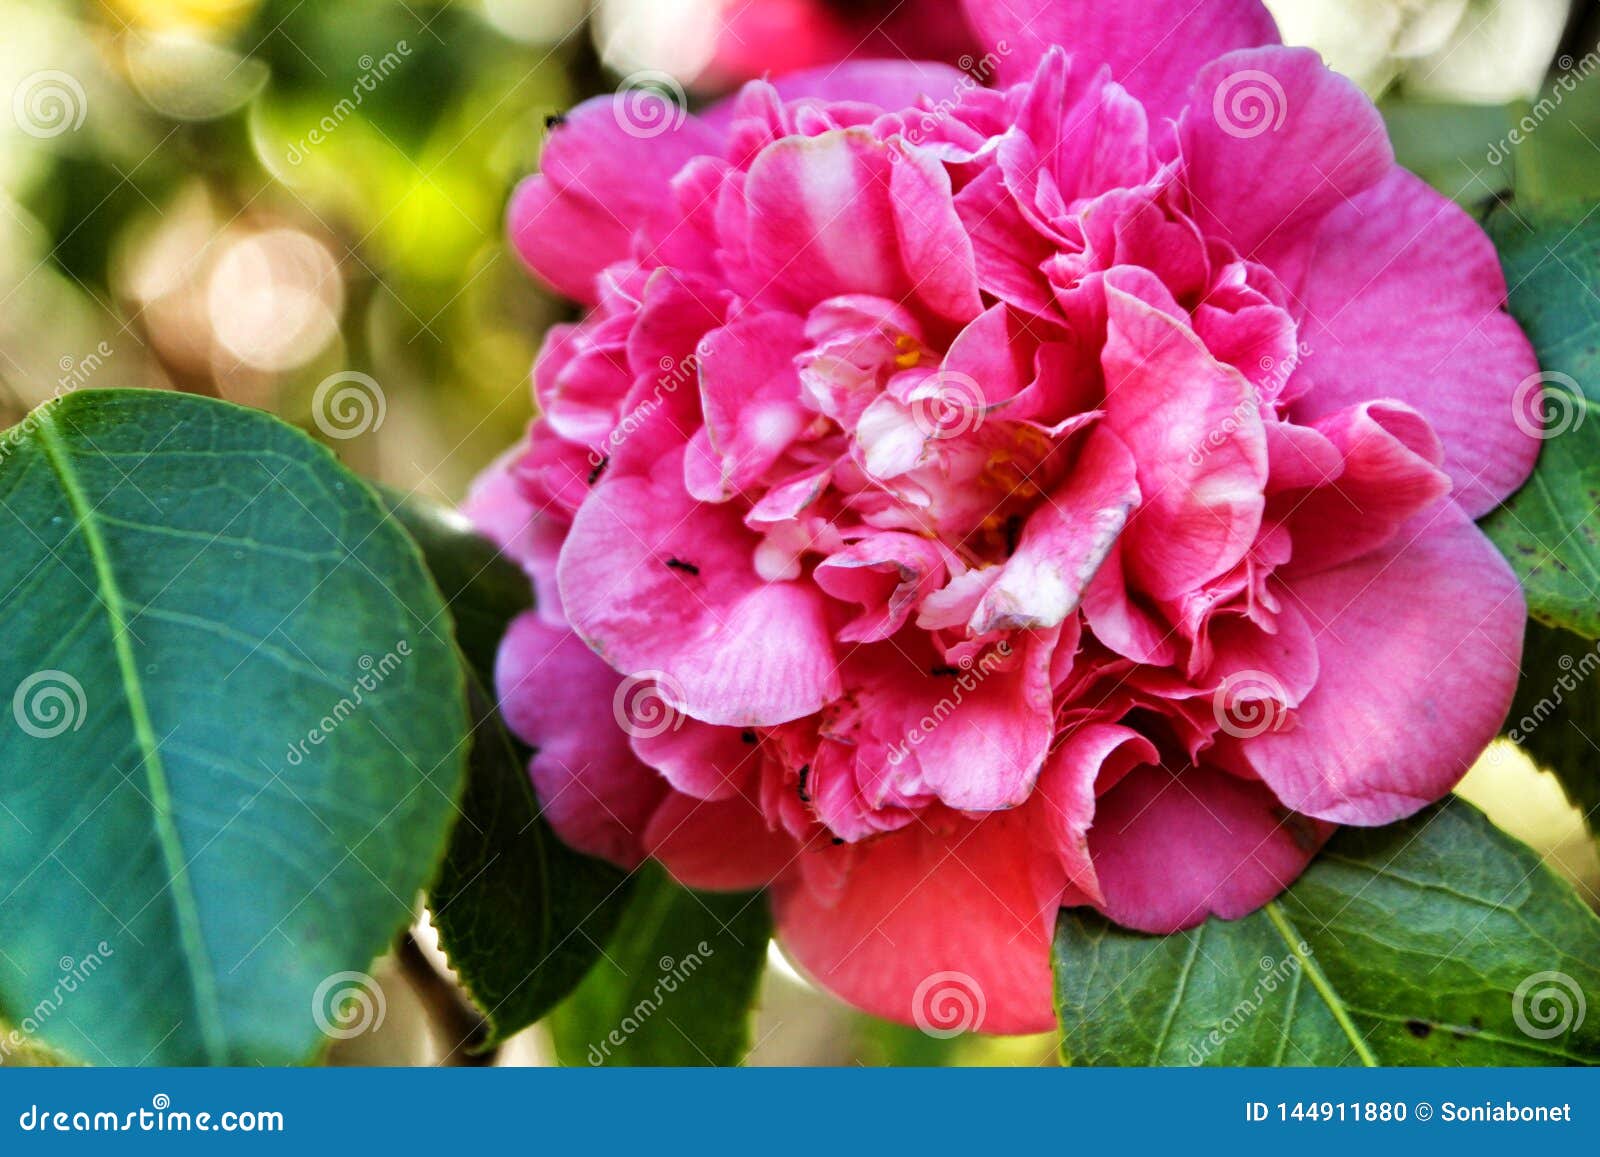 Pink Gardenia Flowers In The Garden Stock Photo Image Of Plant Color 144911880